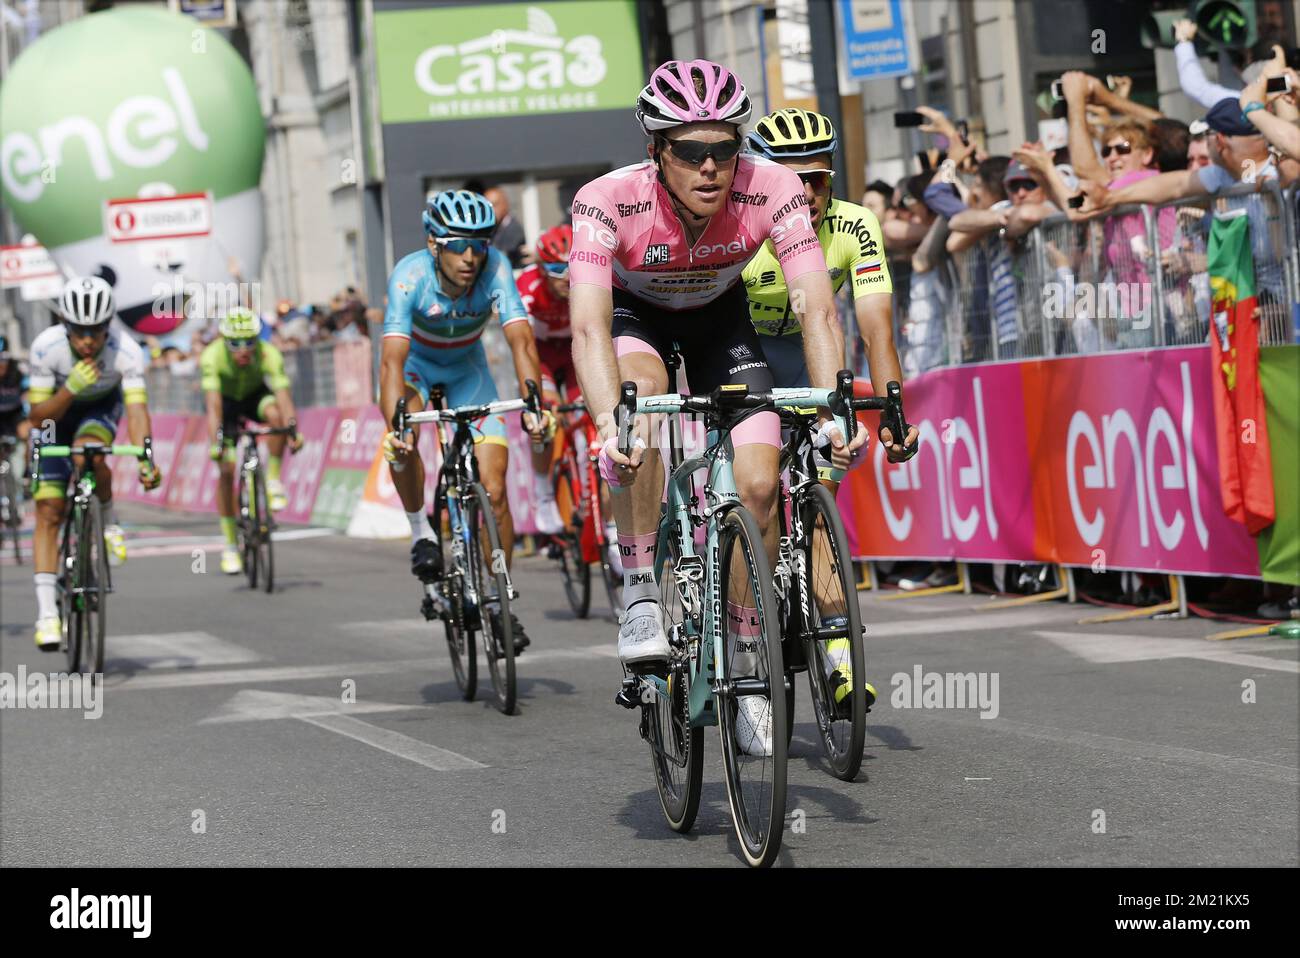 Dutch Steven Kruijswijk of Team LottoNL-Jumbo finishes in the pink jersey of leader in the overall ranking during the eighteenth stage in the 99th edition of the Giro d'Italia cycling race, 240km from Muggio to Pinerolo, on Thursday 26 May 2016, in Italy.  Stock Photo